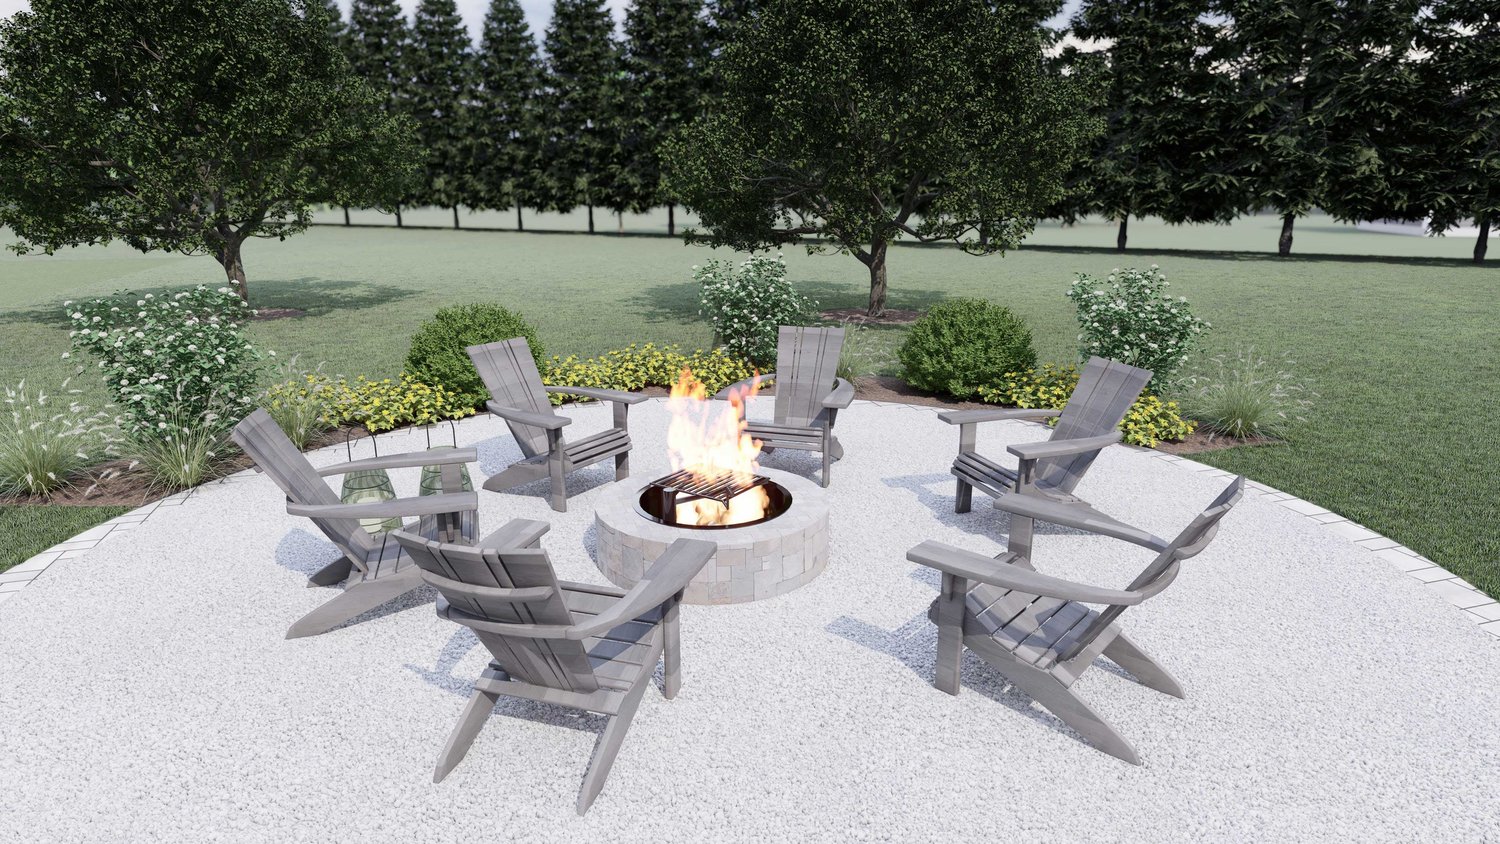 Ocean City gravel patio with adirondack chairs around fire pit